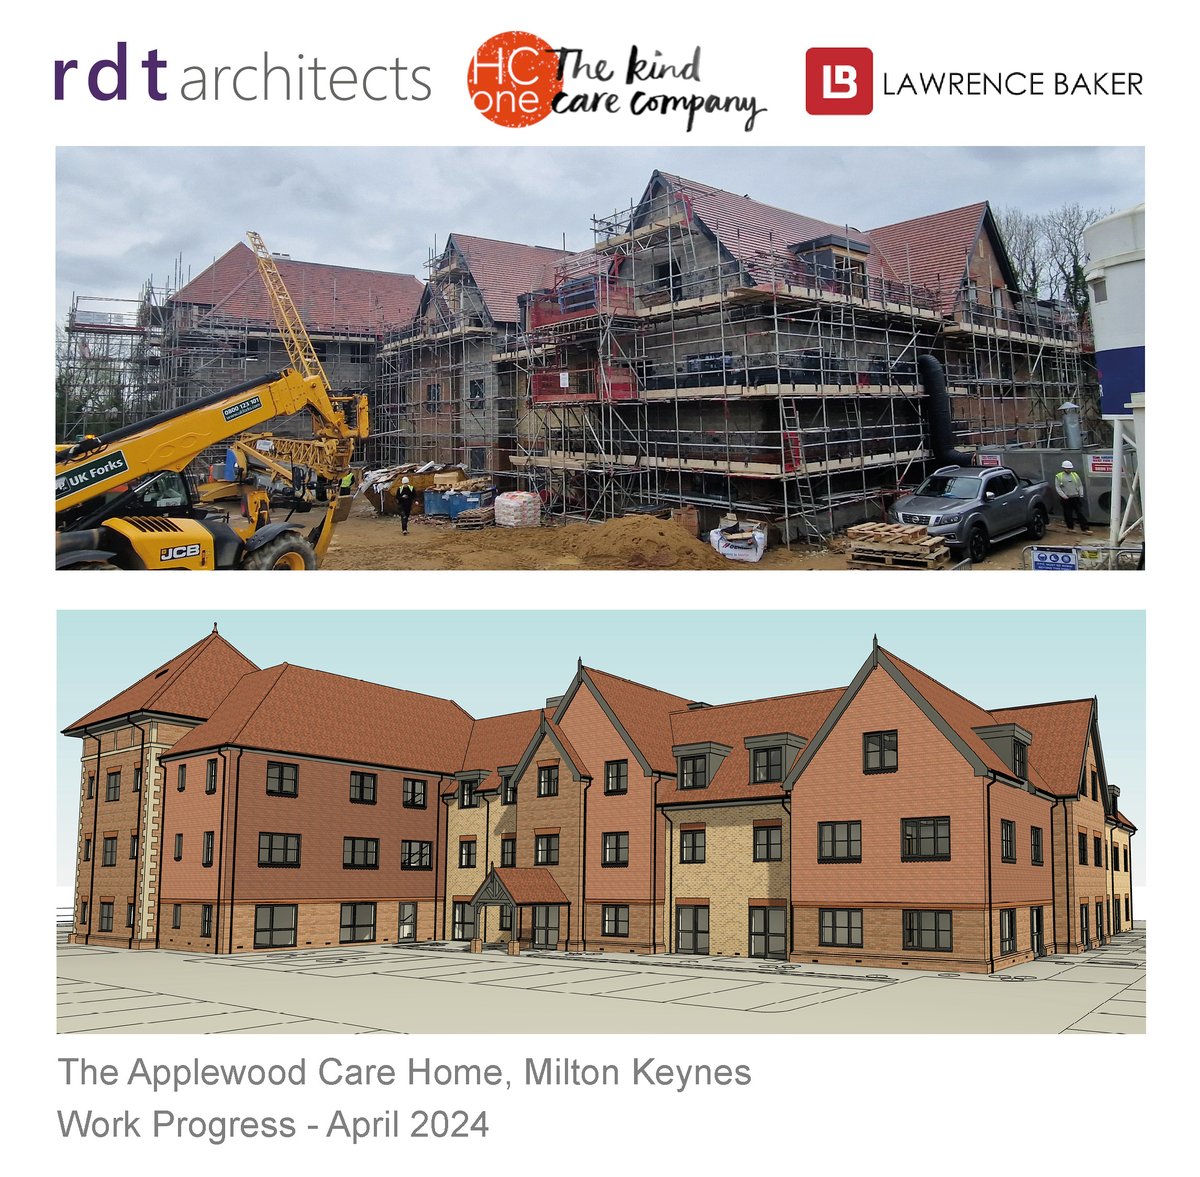 78 bed care home for HC-One will offer luxurious communal facilities including scenic gardens, spacious lounges and dining areas, bar, bistro, hair and beauty salon, cinema, library and a private dining area for family celebrations #RDTArchitects #miltonkeynes #carehome #design